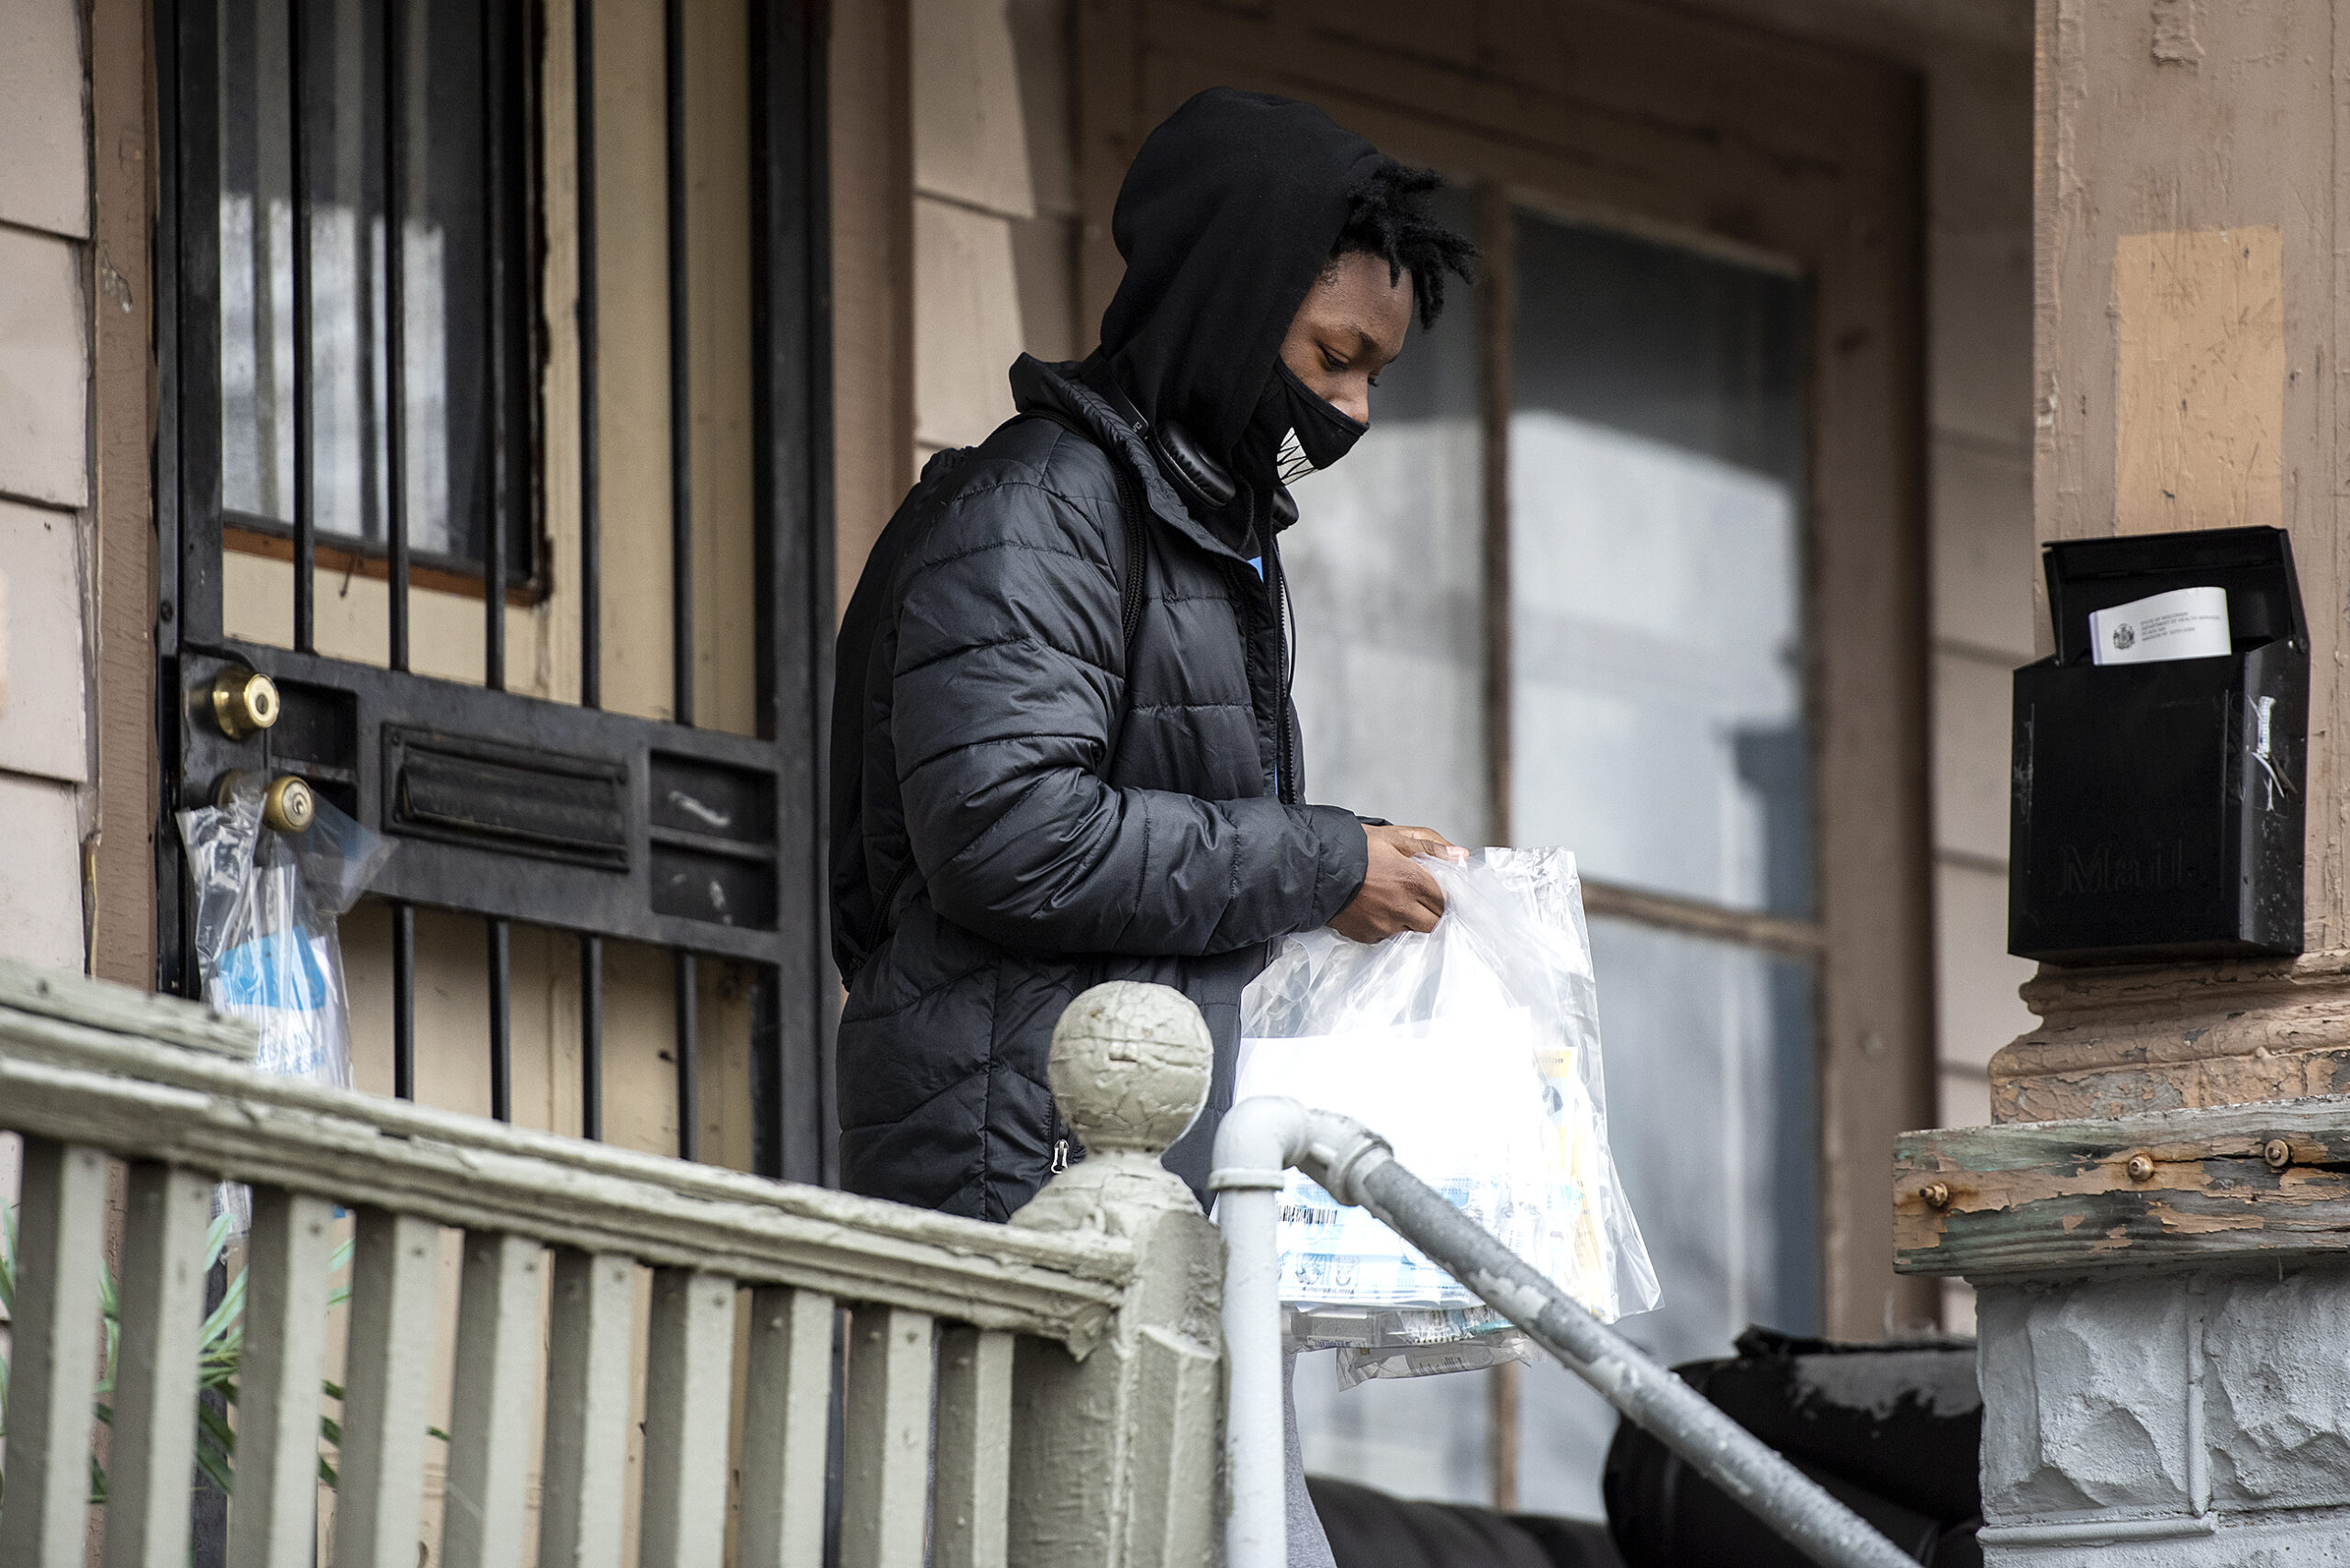 A person carries plastic bags as he walks away from a house's front door.